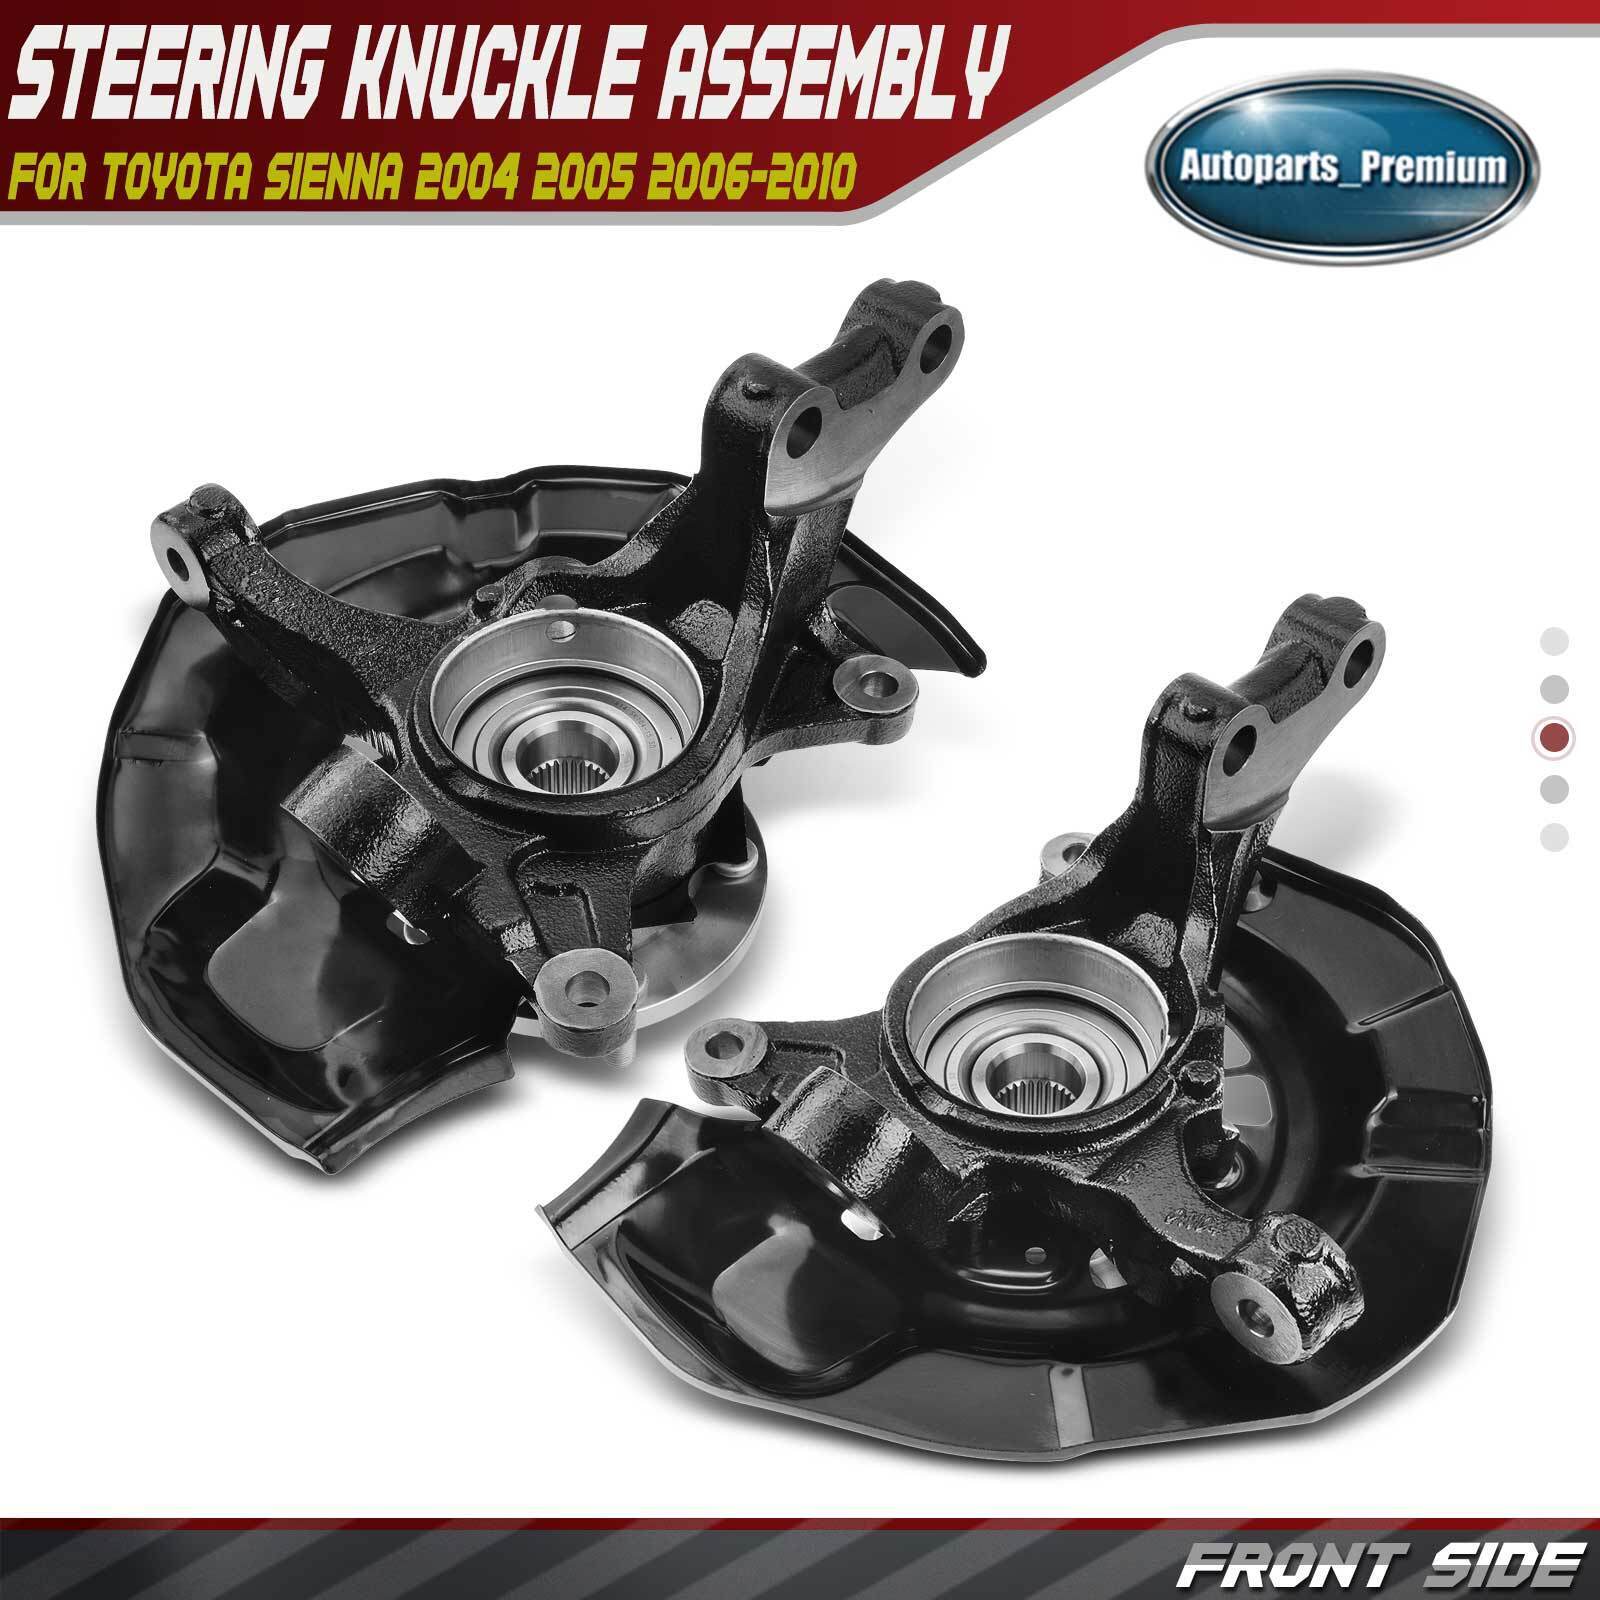 2Pcs Front Wheel Hub Bearing Steering Knuckle Assembly for Toyota Sienna 04-10